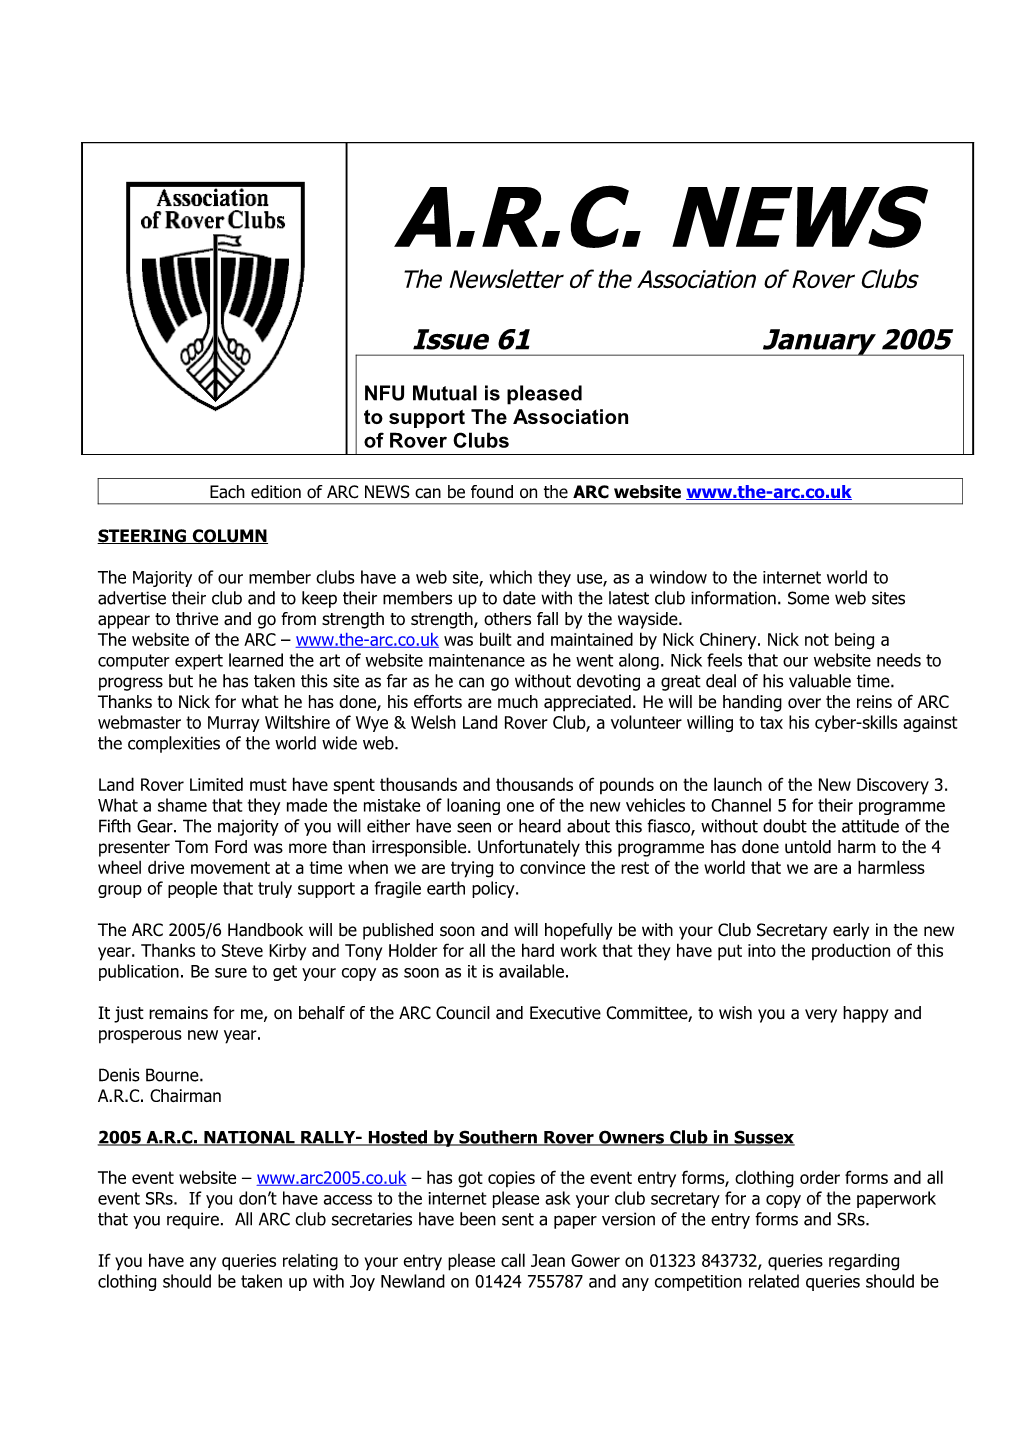 Each Edition of ARC NEWS Can Be Found Onthe ARC Website